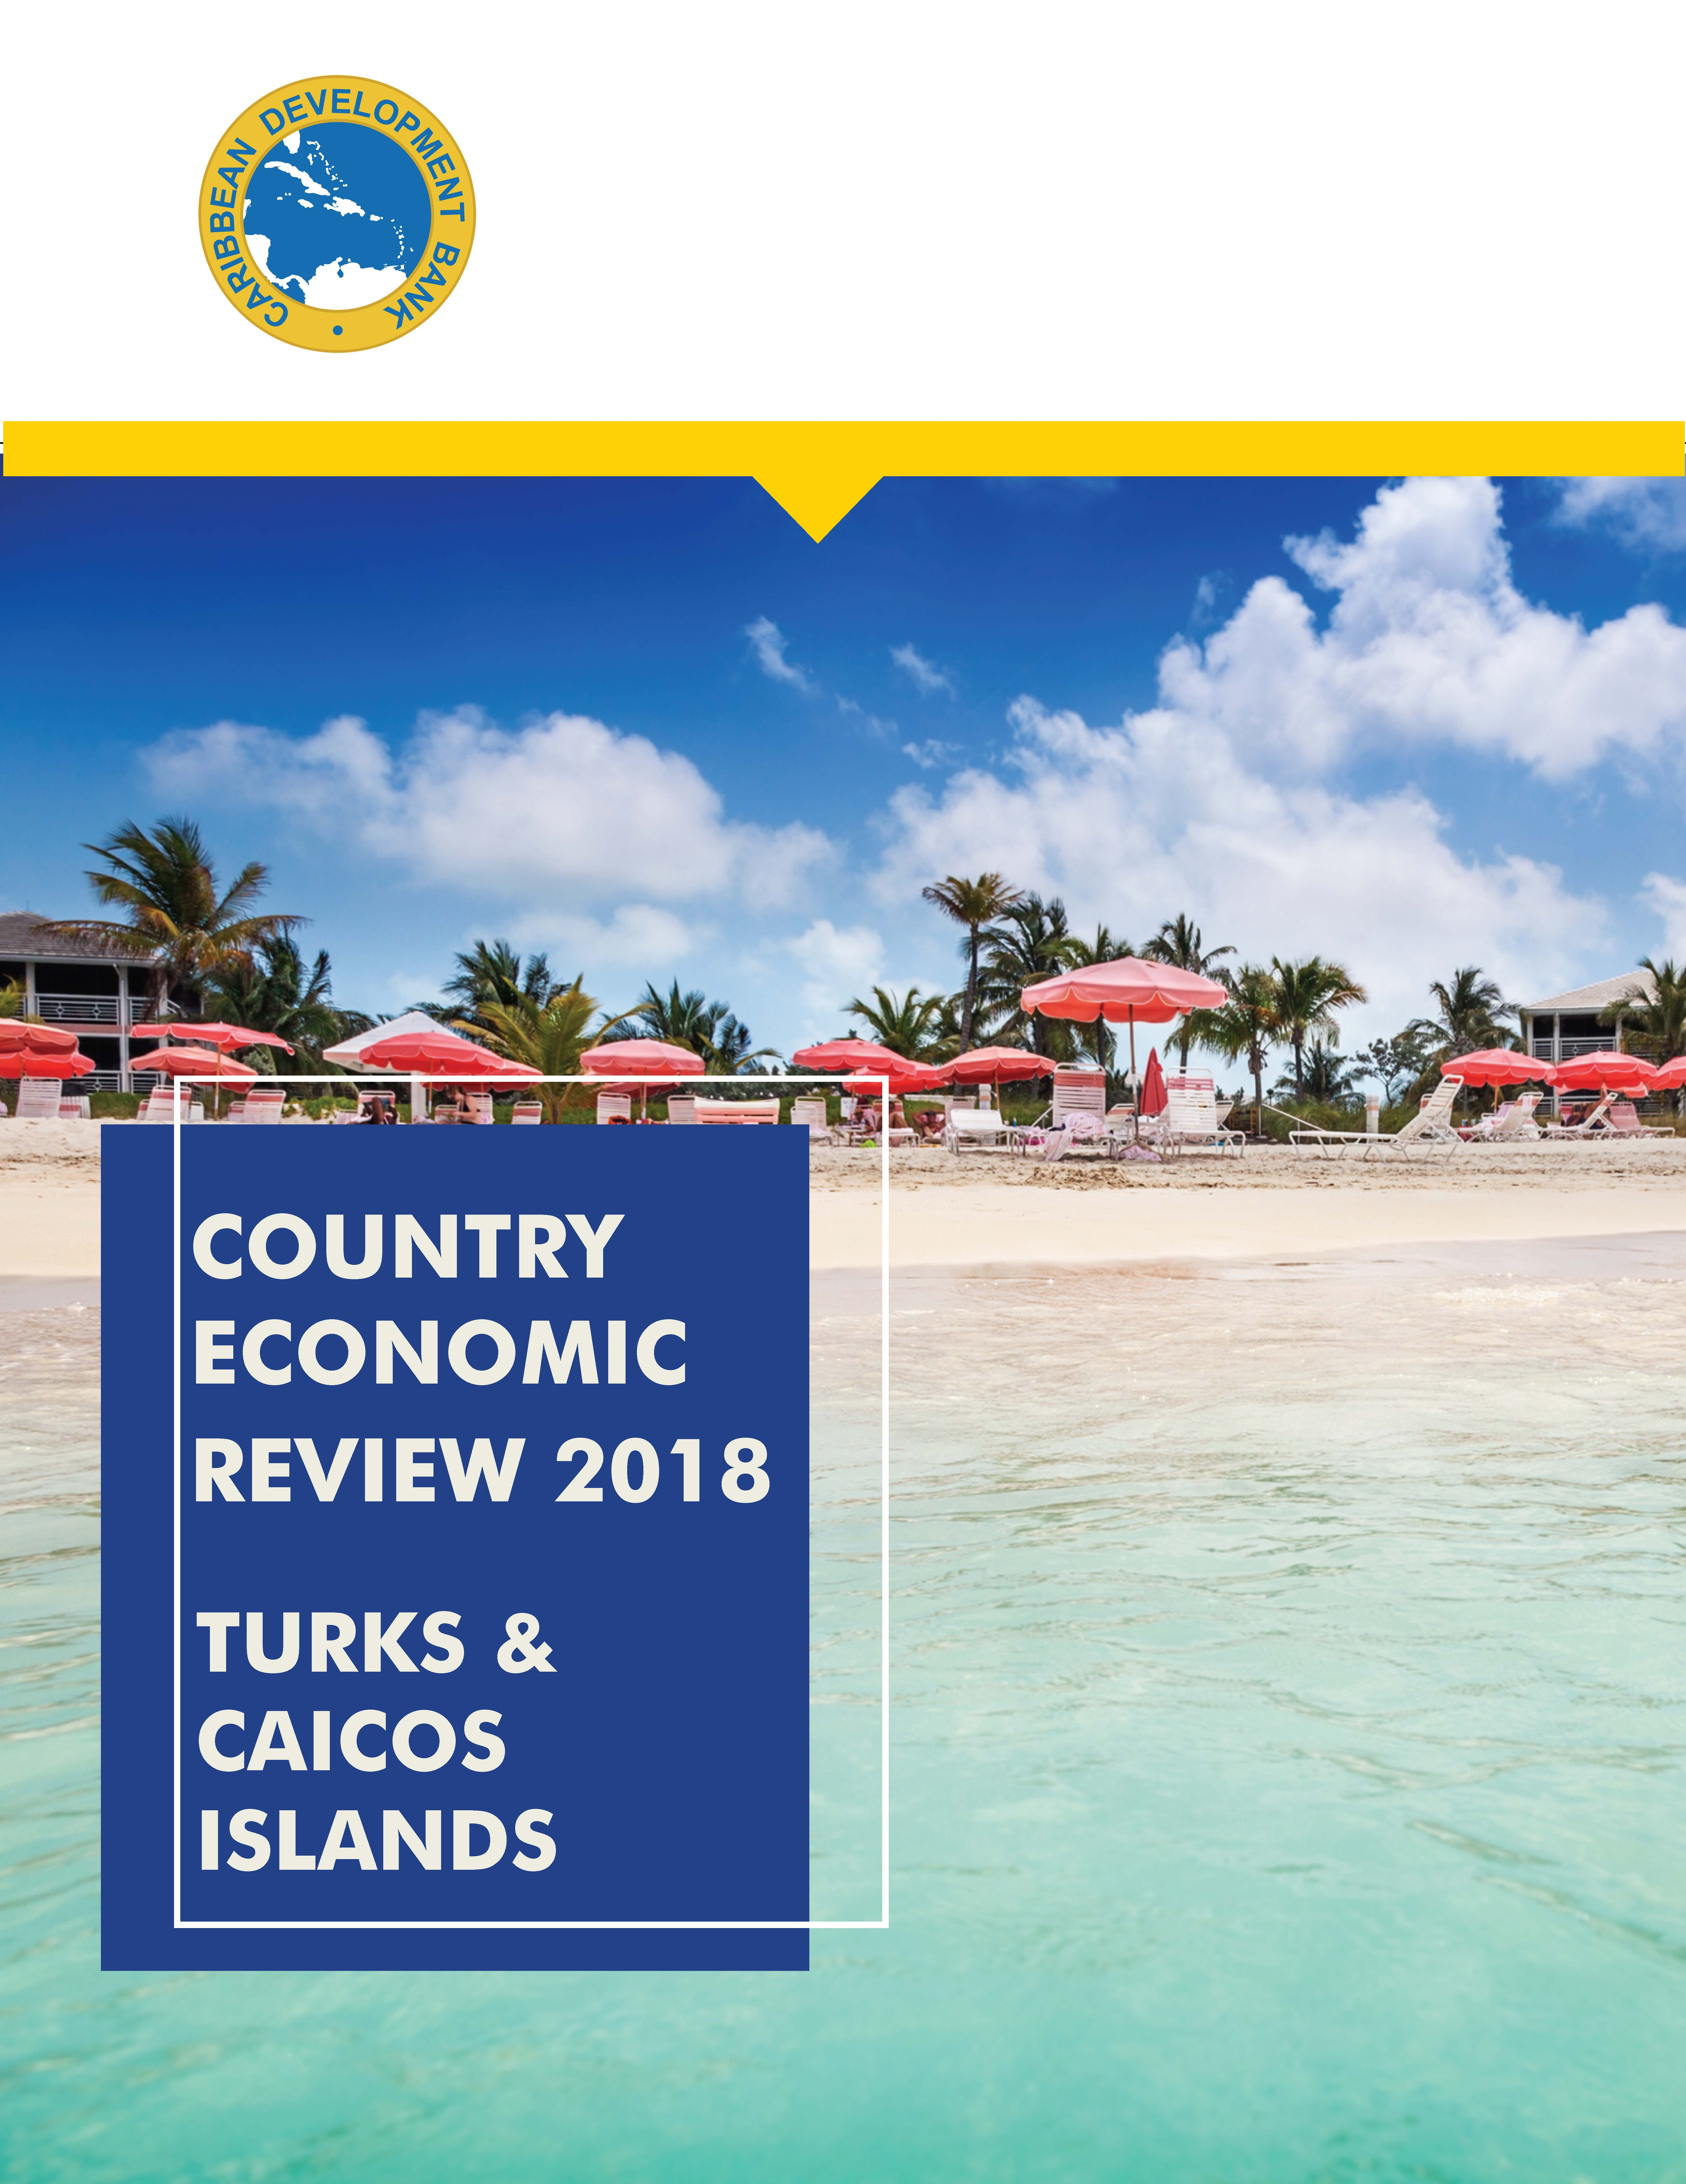 cover of 2018 Economic Review for Turks and Caicos Islands showing view of white sandy beach with pink umbrellas and white beach chairs